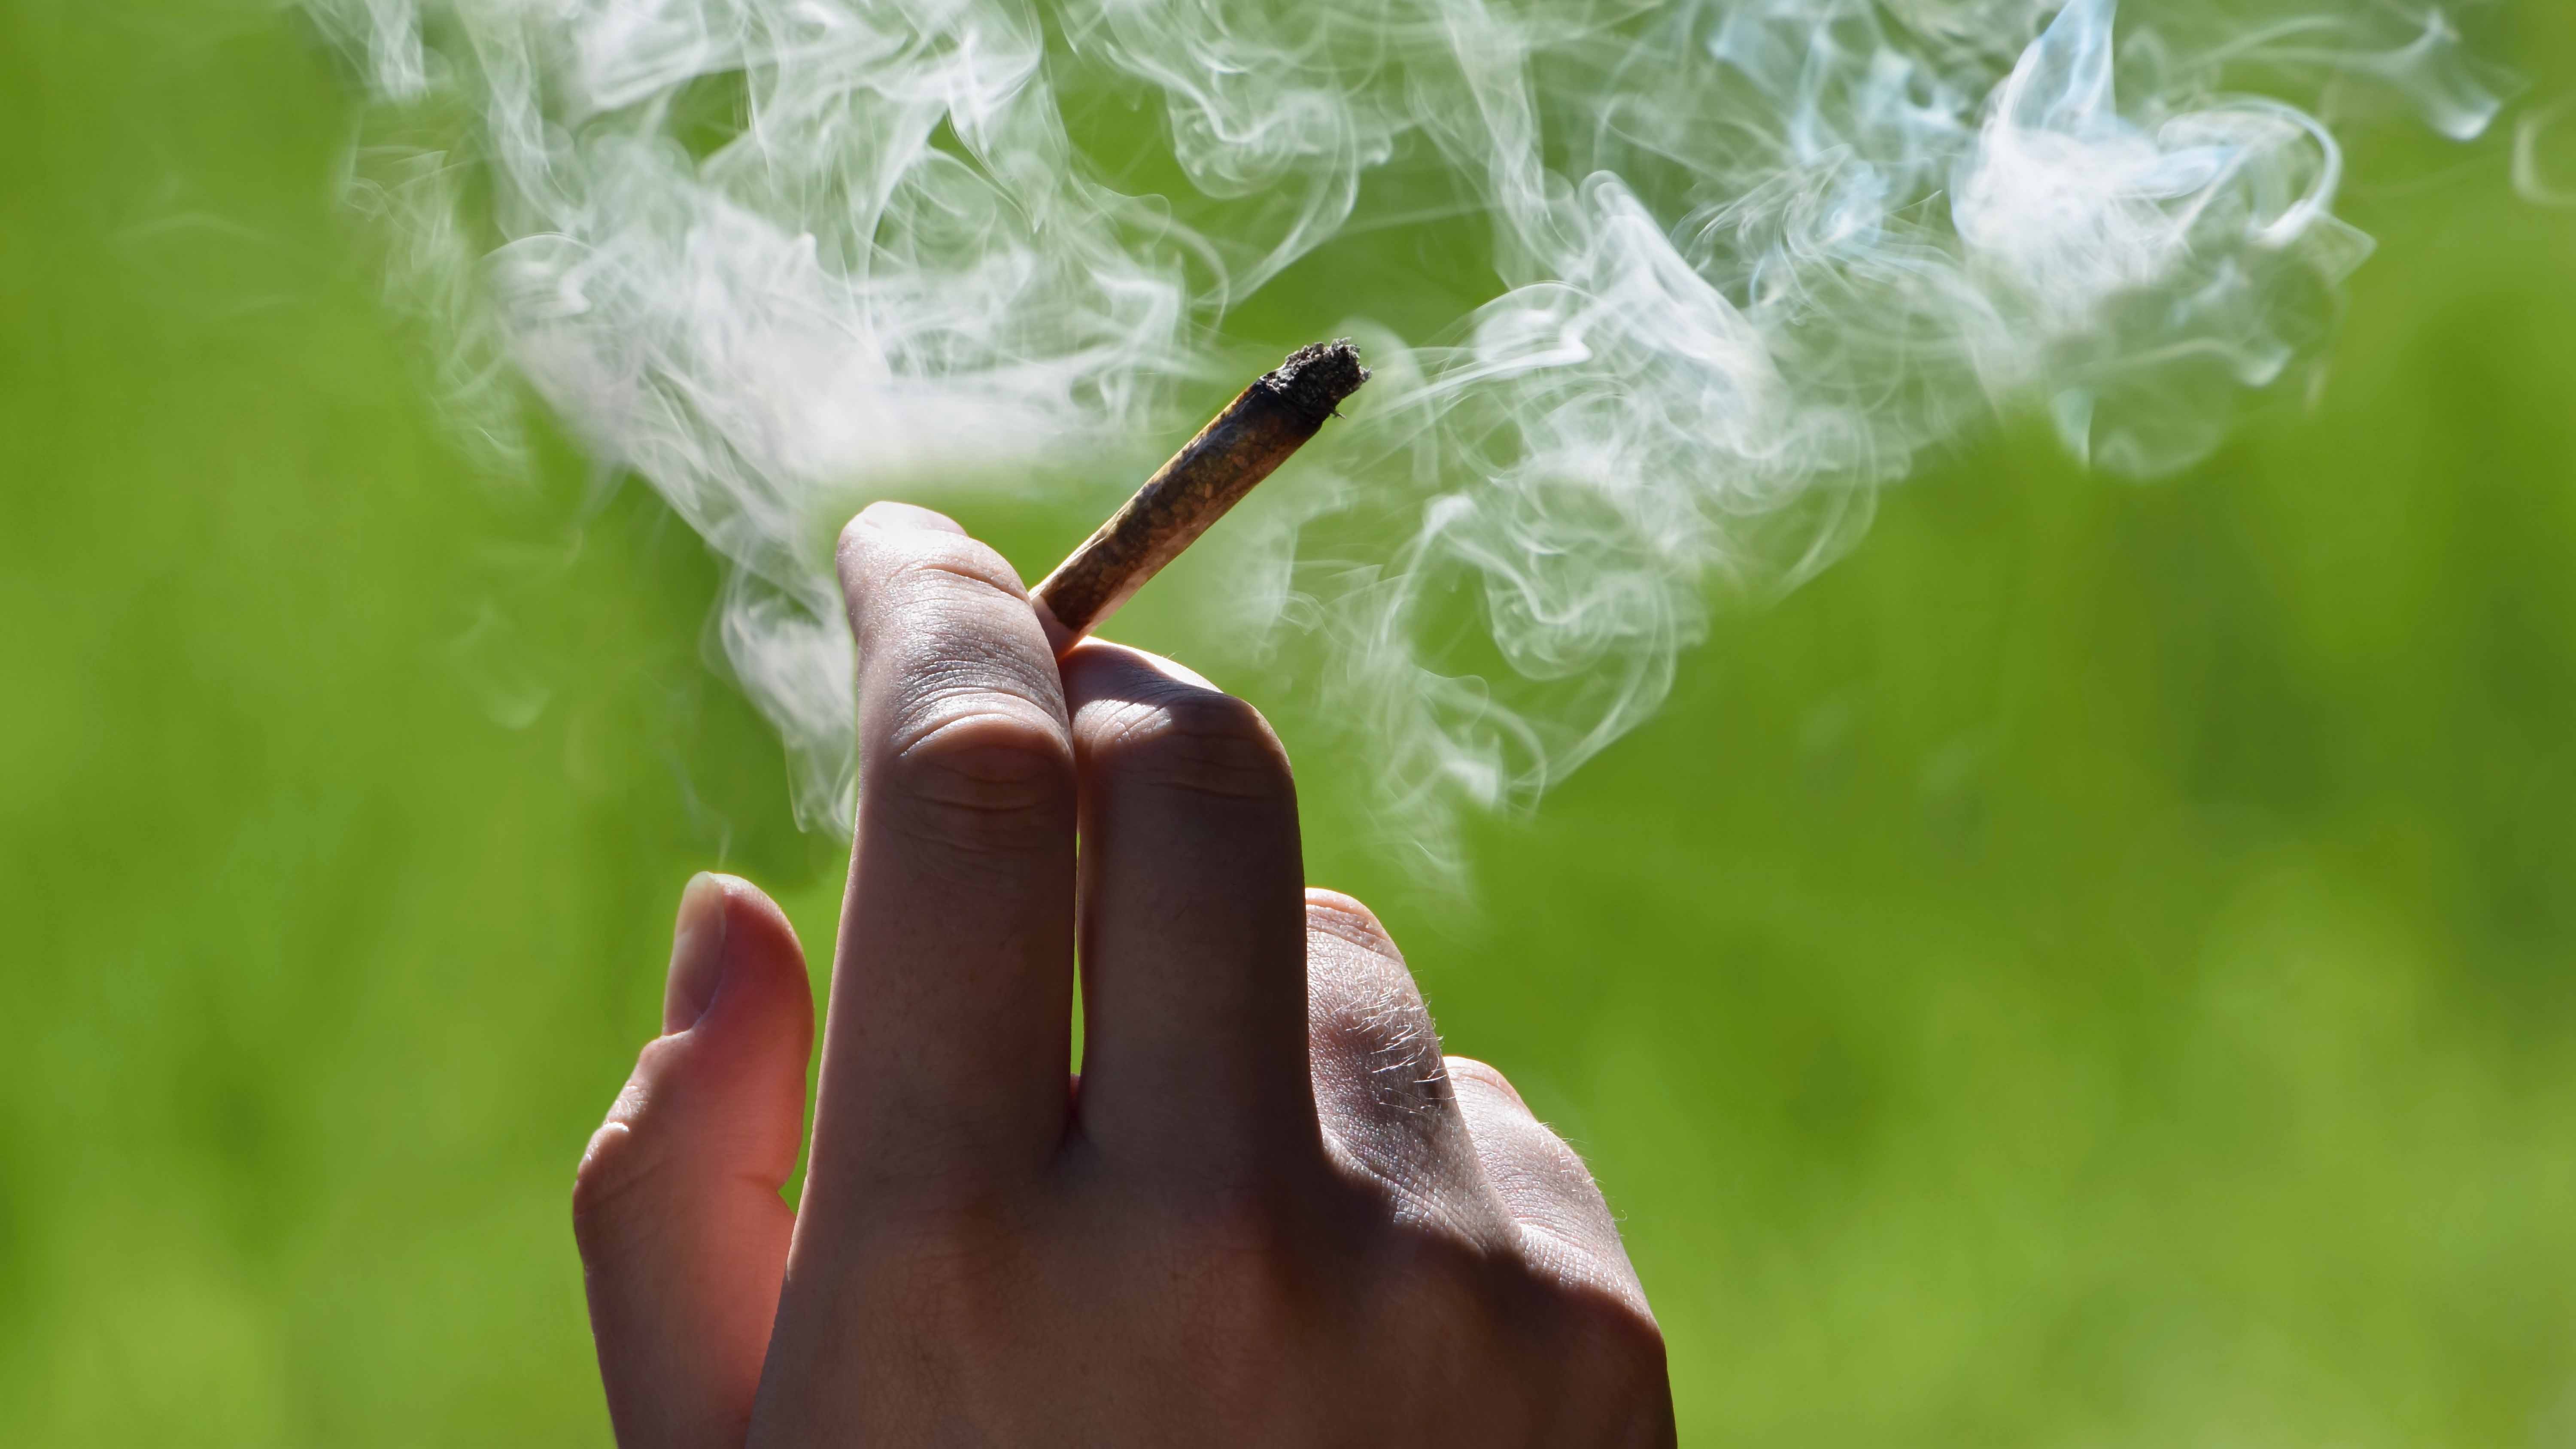 Photo via Shutterstock. Recreational marijuana is legal in Virginia now, but there are still some rules, including one that prohibits public consumption.